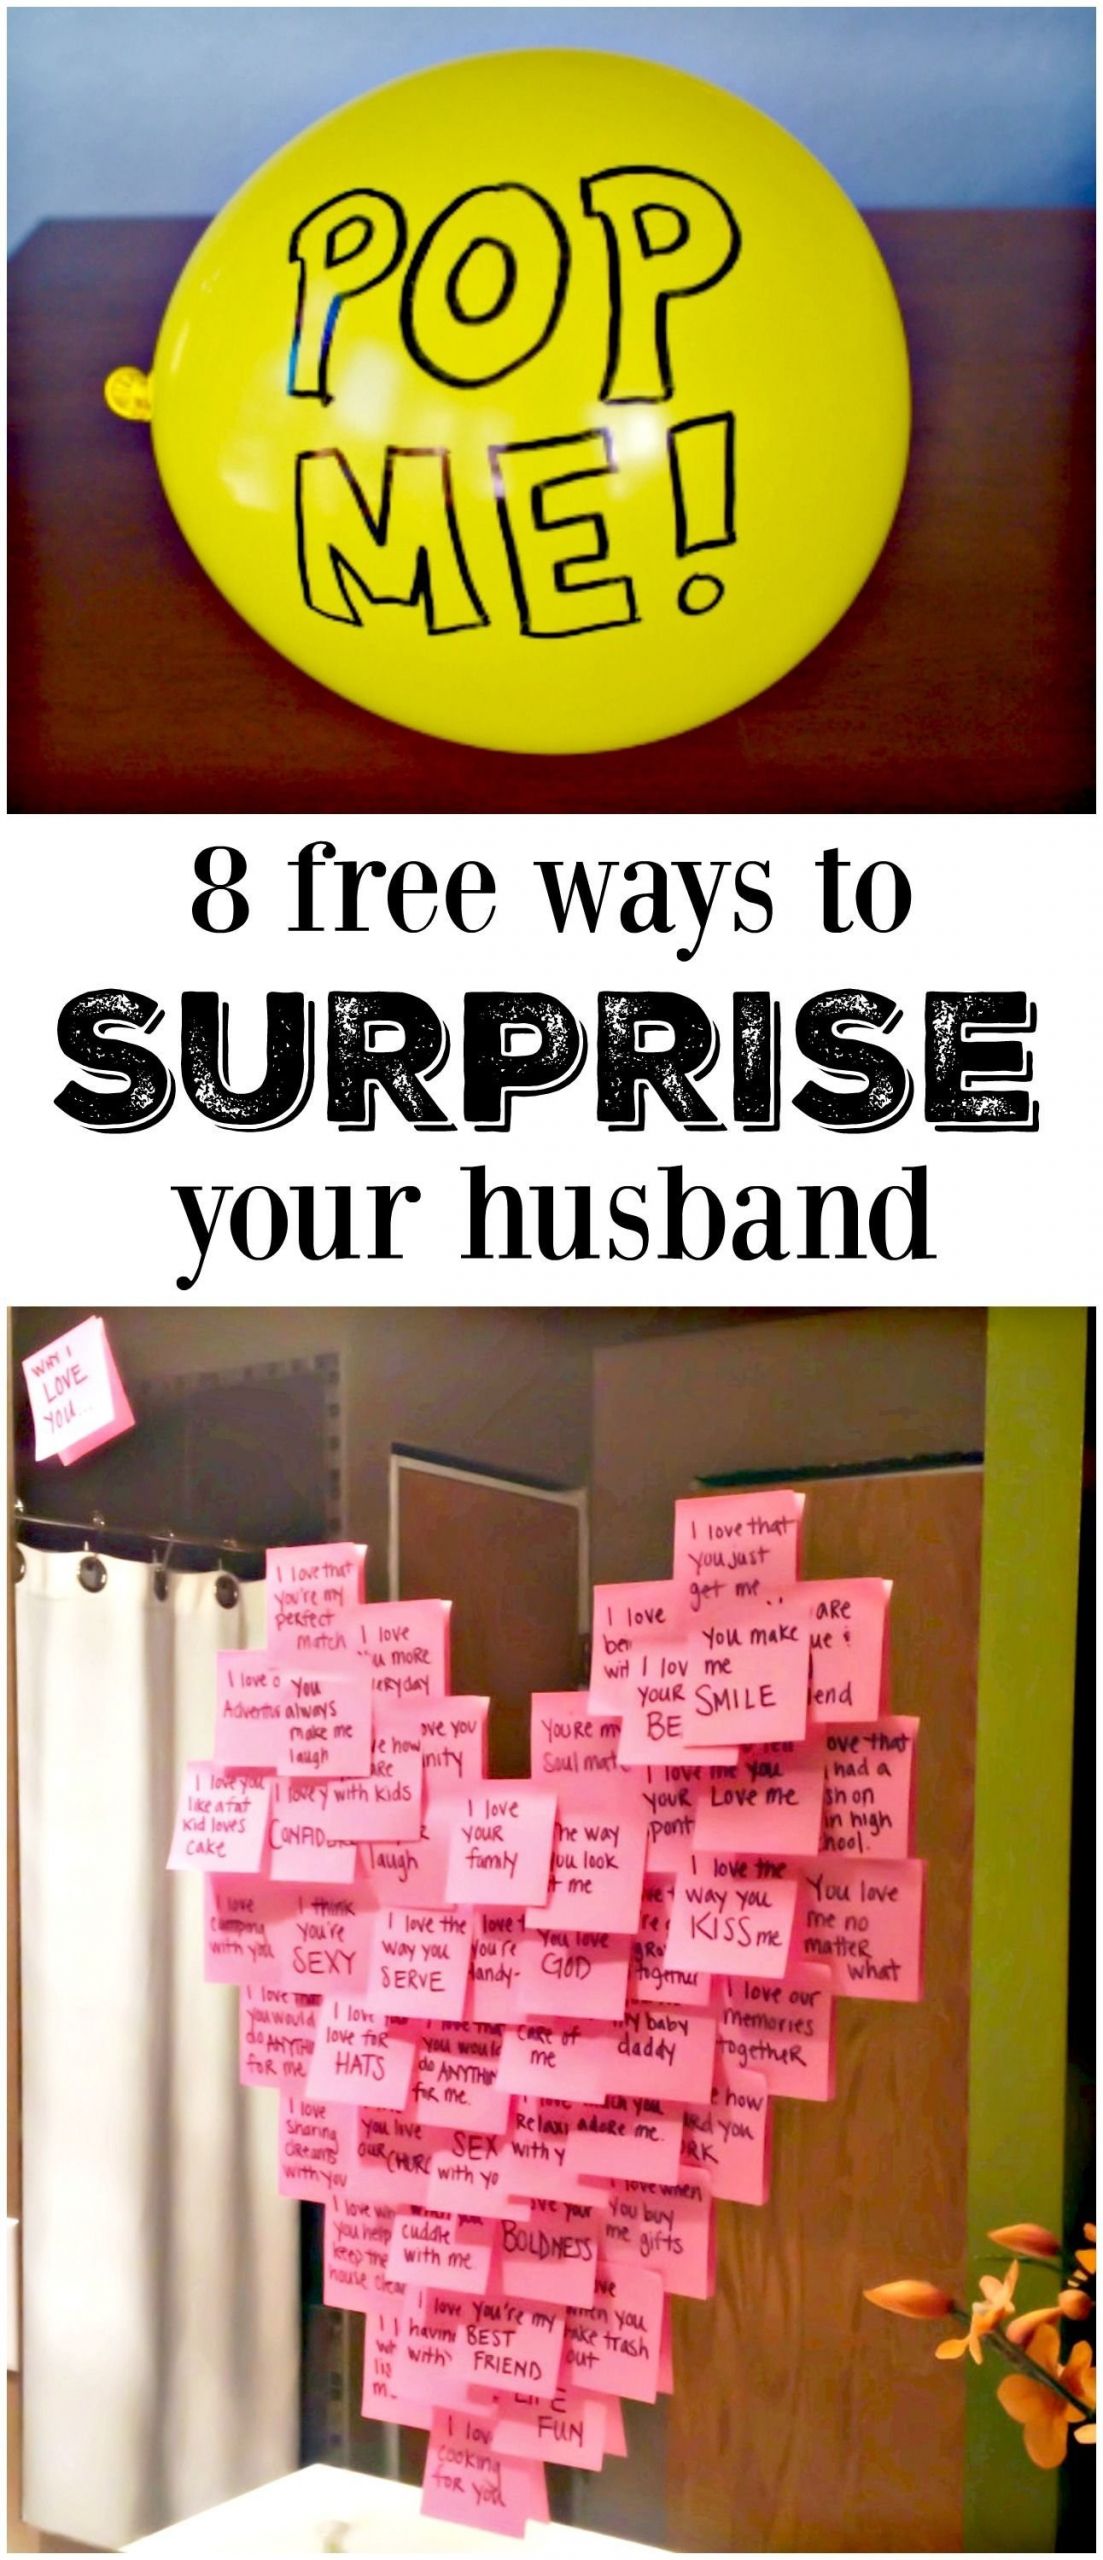 DIY Gifts For Husbands
 10 Amazing Creative Birthday Ideas For Husband 2019